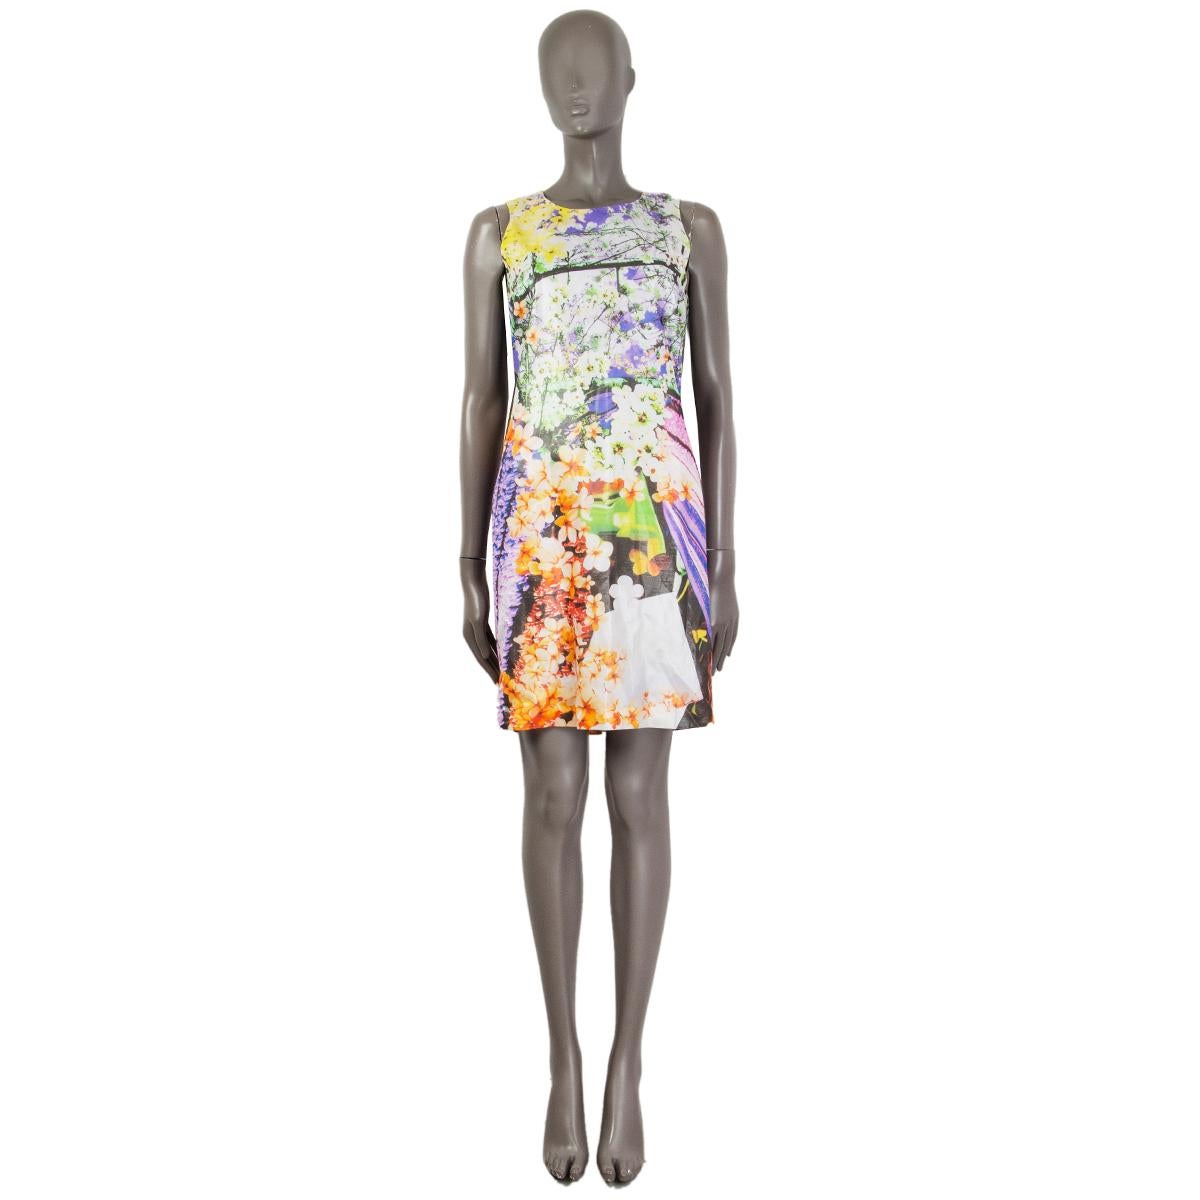 100% authentic Mary Katrantzou sleeveless floral print shift dress in multi-color viscose blend (assumed as tag is missing) with a round neck. Has a metallic-like shimmer. Closes on the back with a zipper. Lined in viscose blend (assumed as tag is